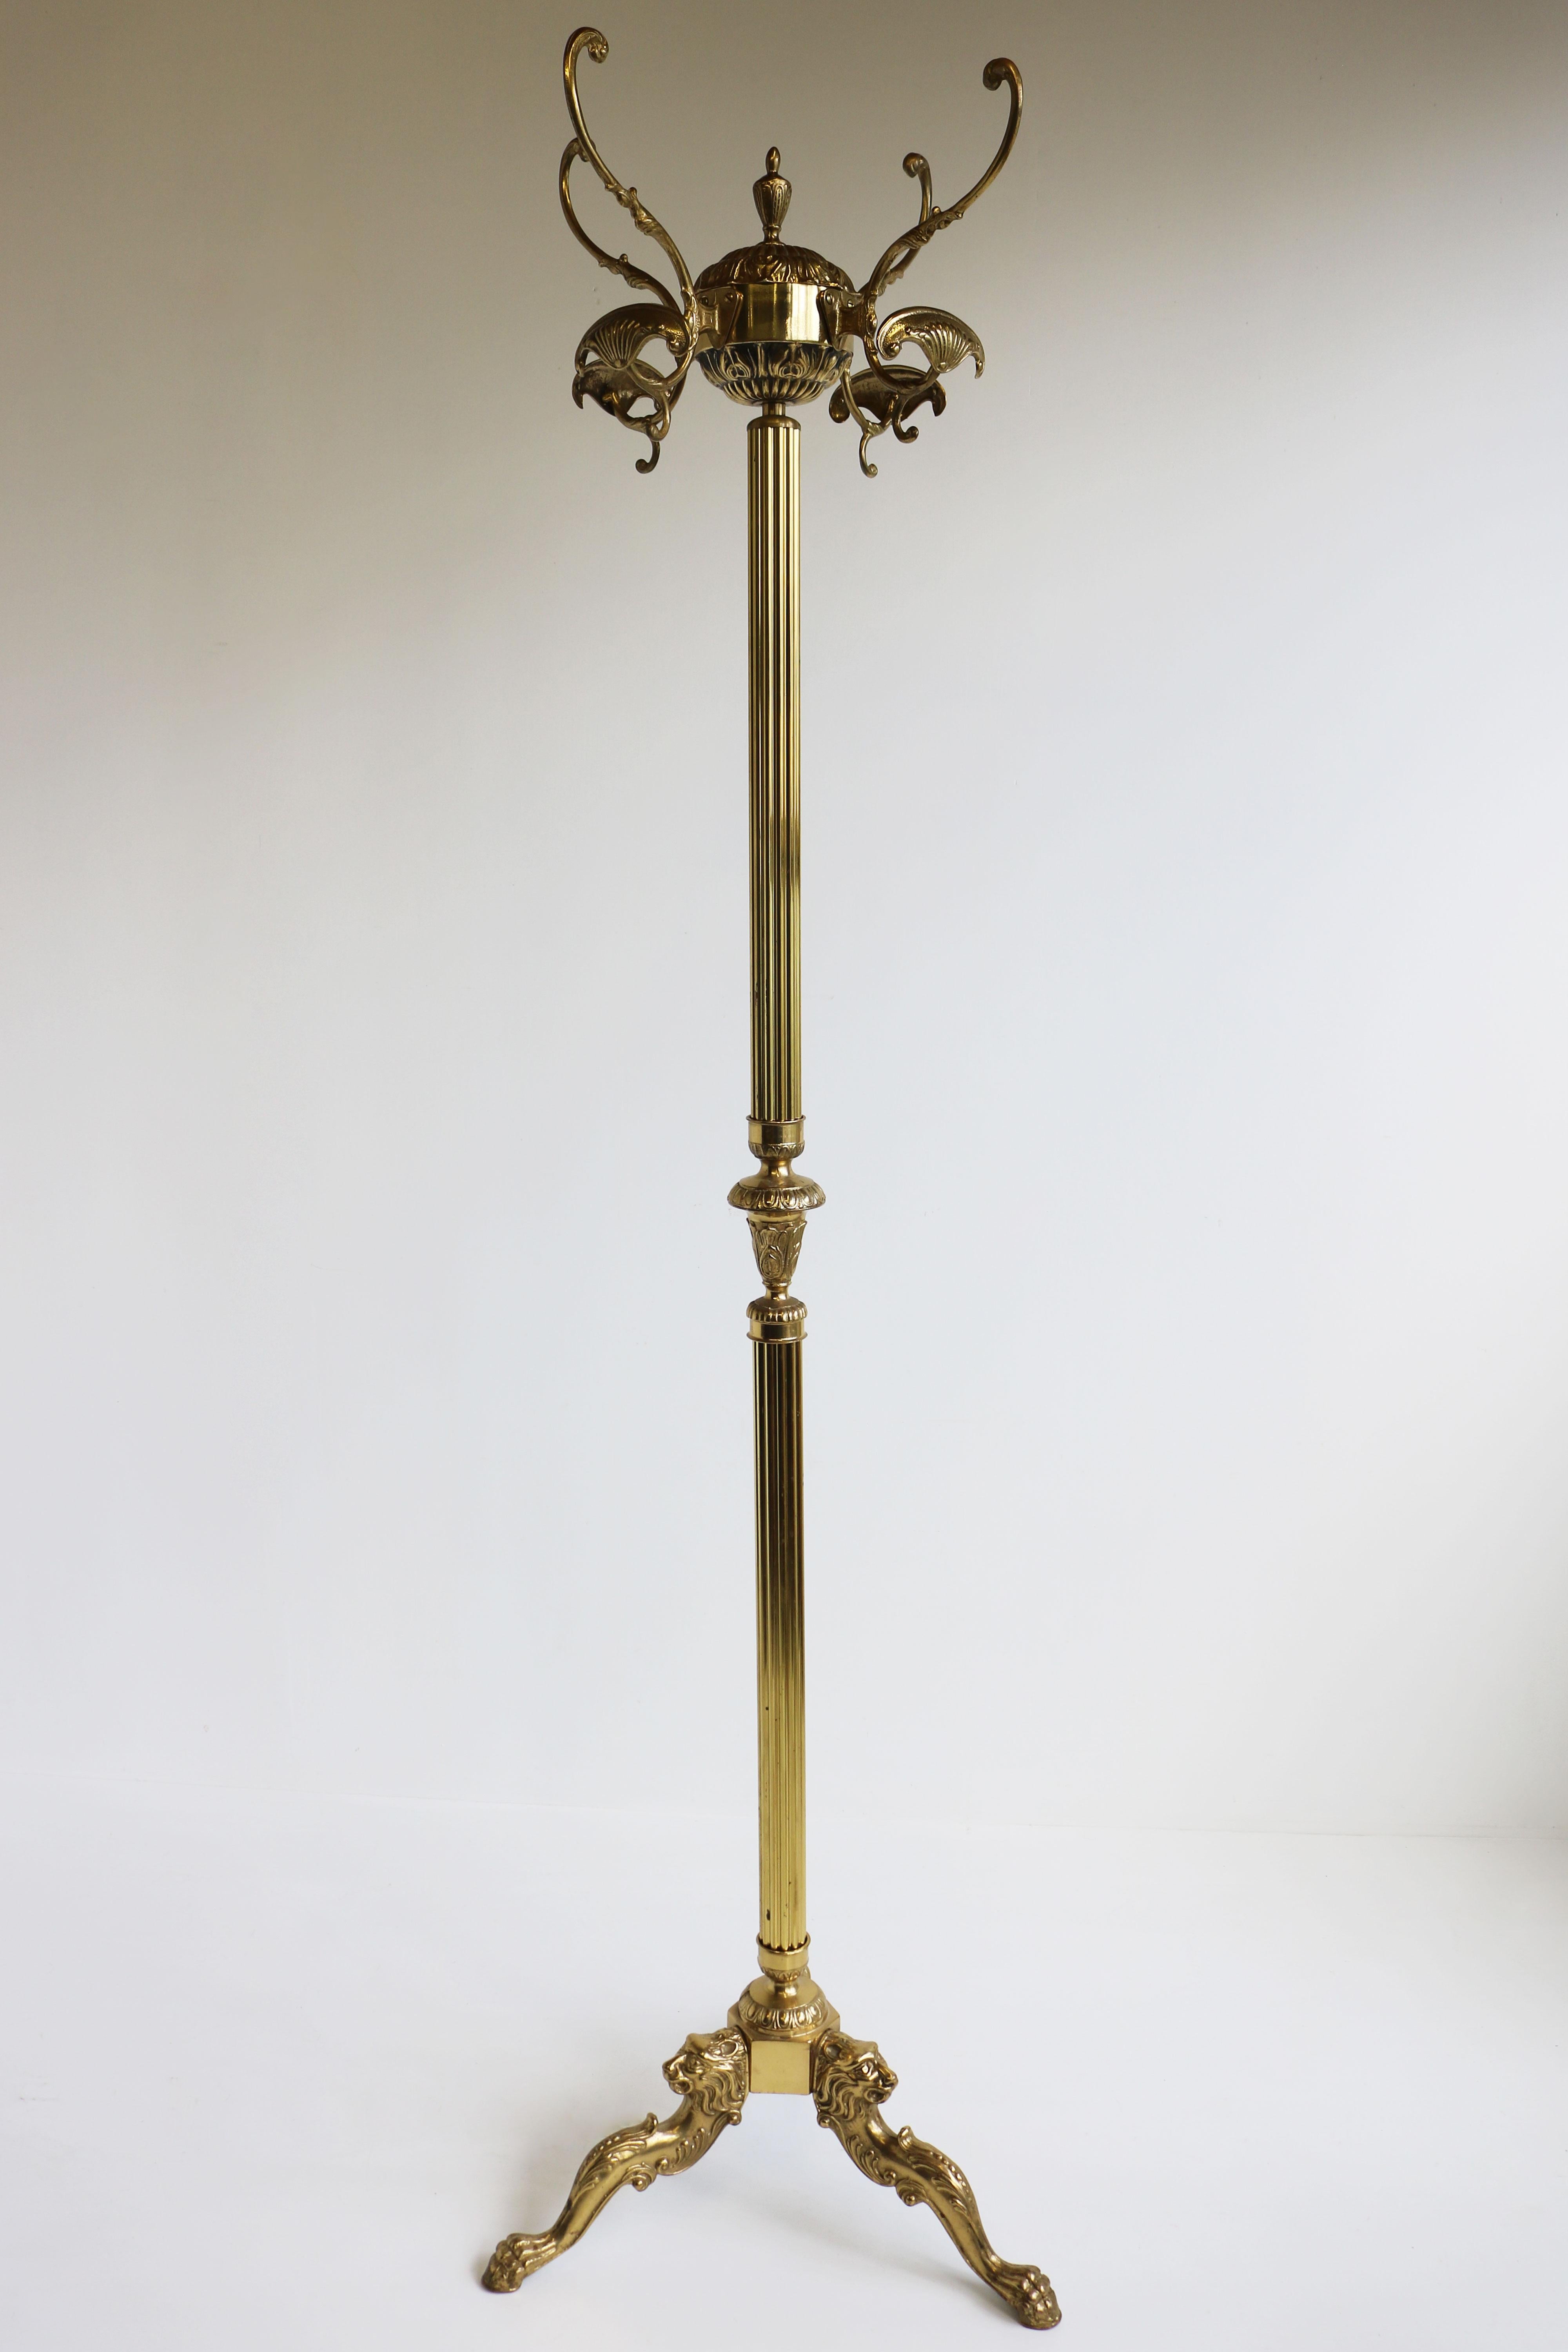 A stunning and very well made mid-century free standing Italian ornate brass coat stand from the 1950s. 
With turnable crown and casted brass hooks, and three lightly curved legs are embellished with lions heads and end in the lions' paws. This